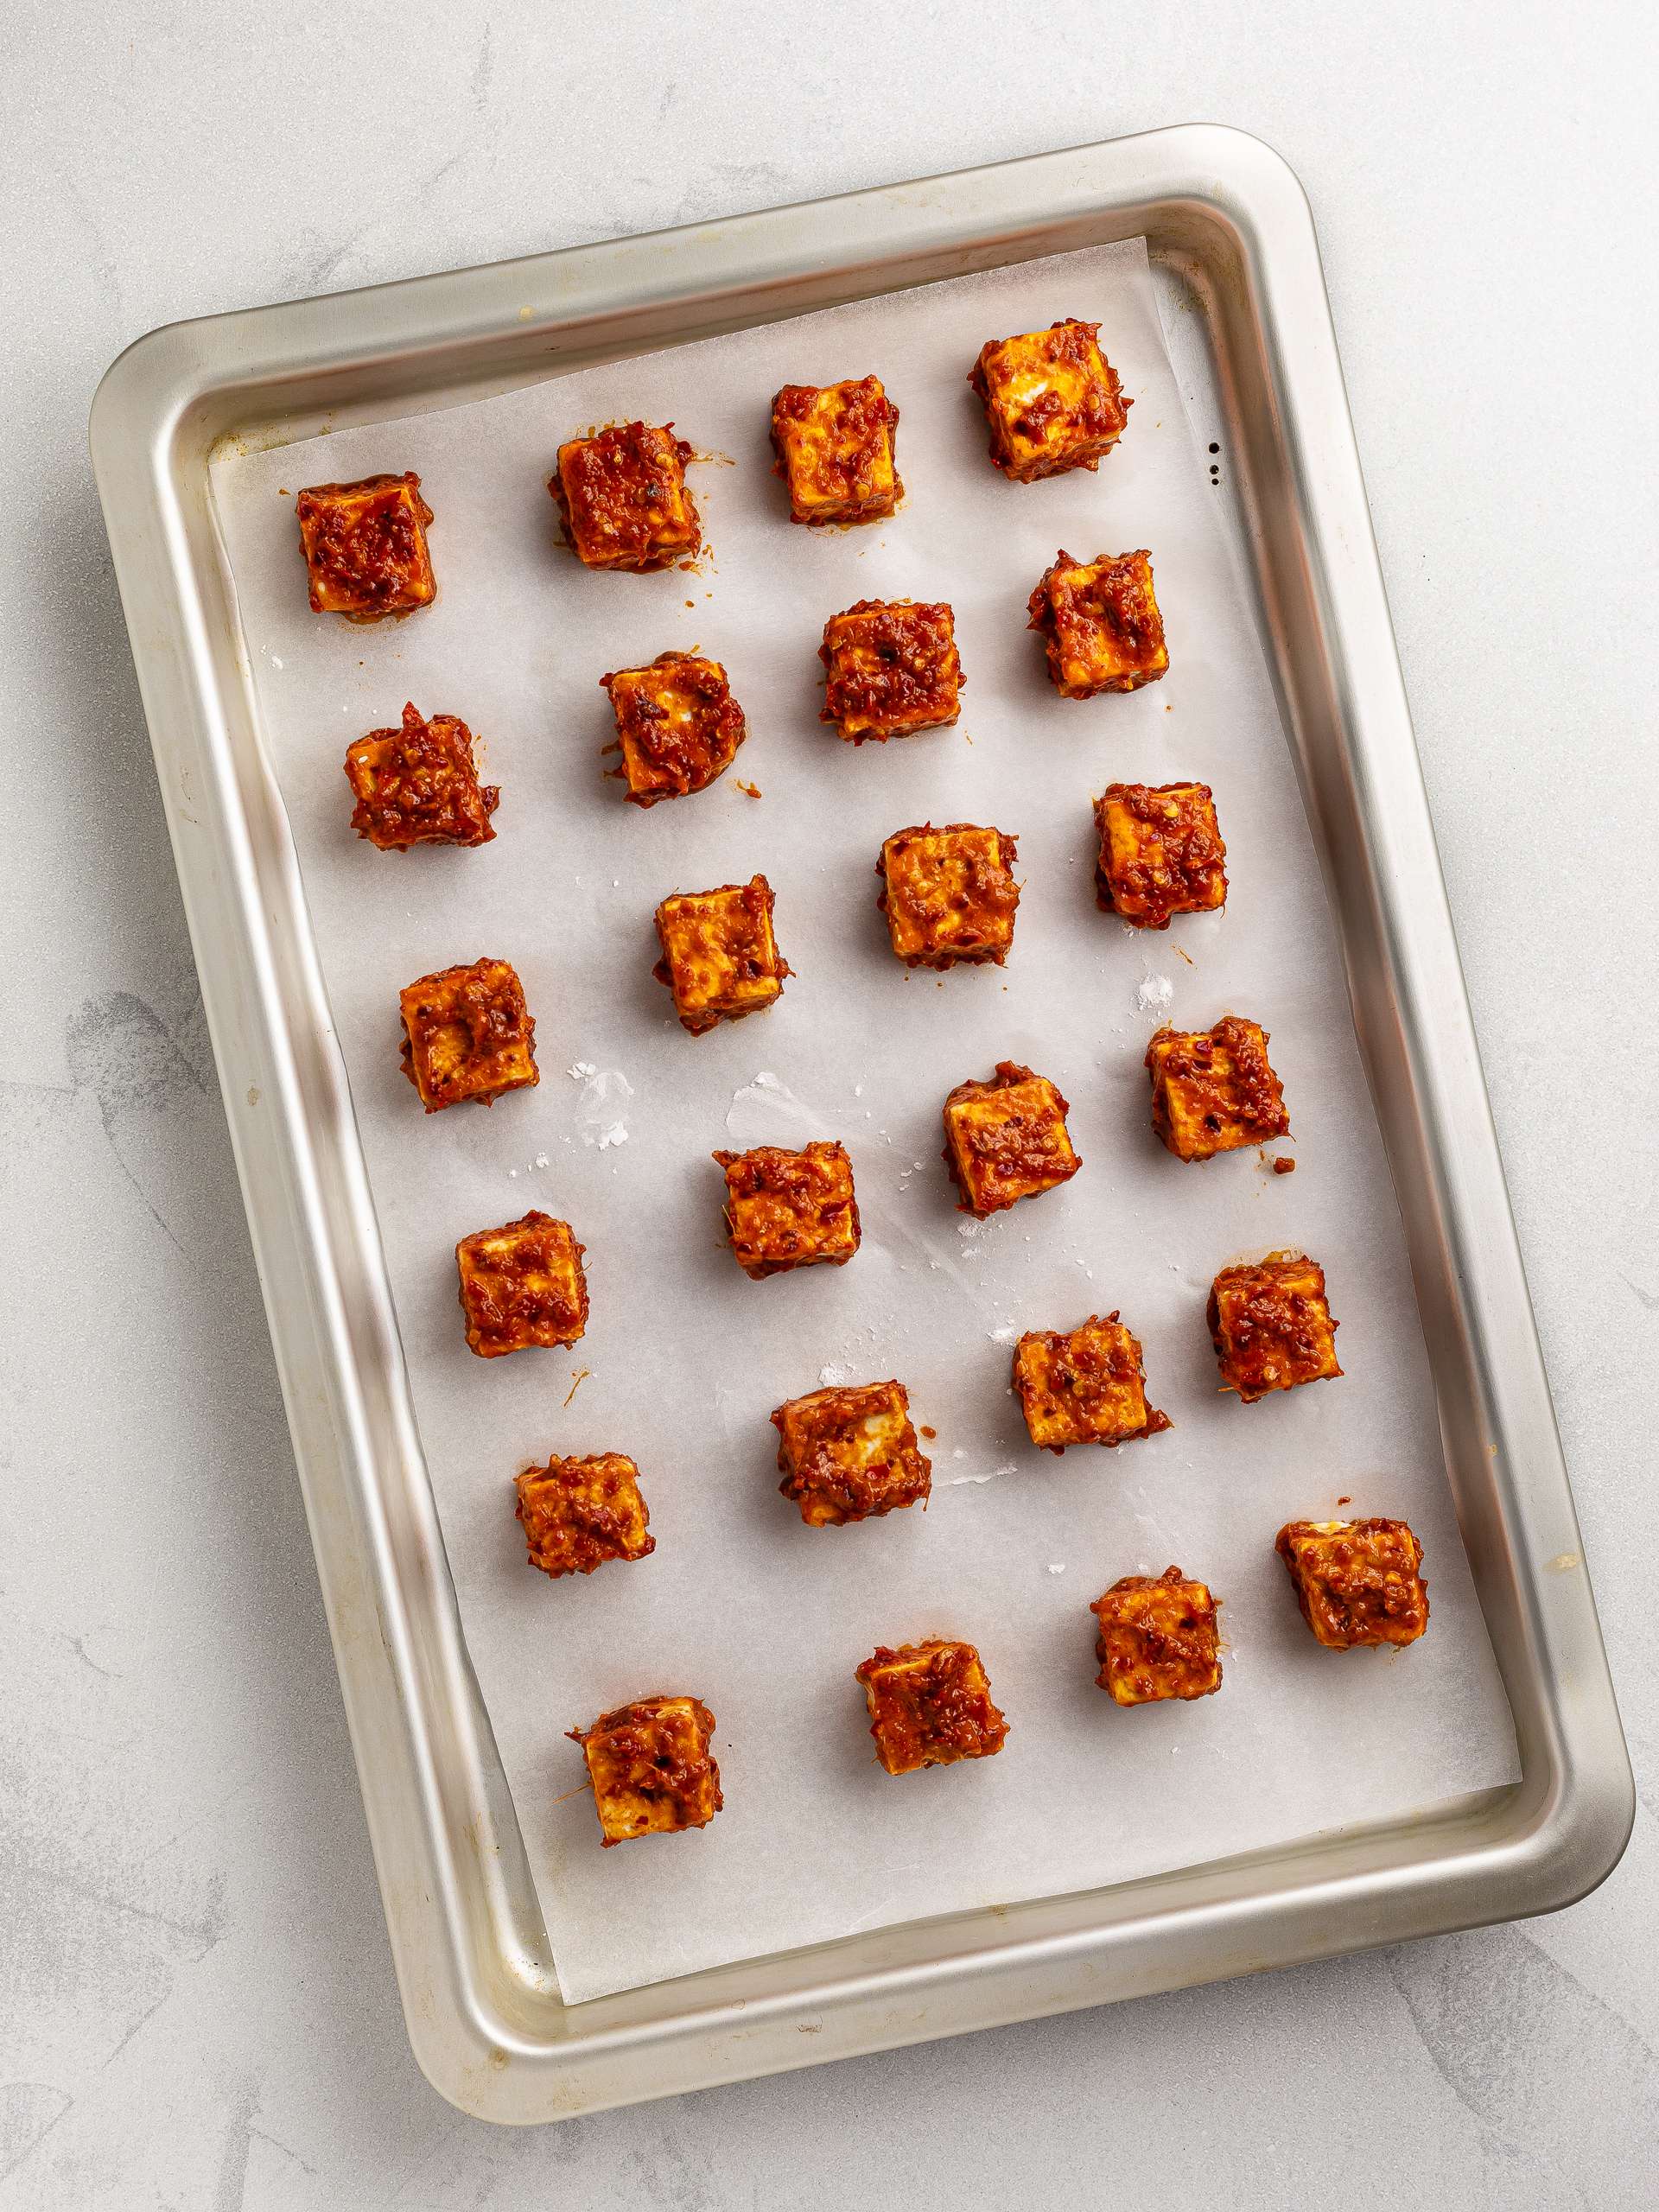 tofu bites with firecracker sauce on a baking tray